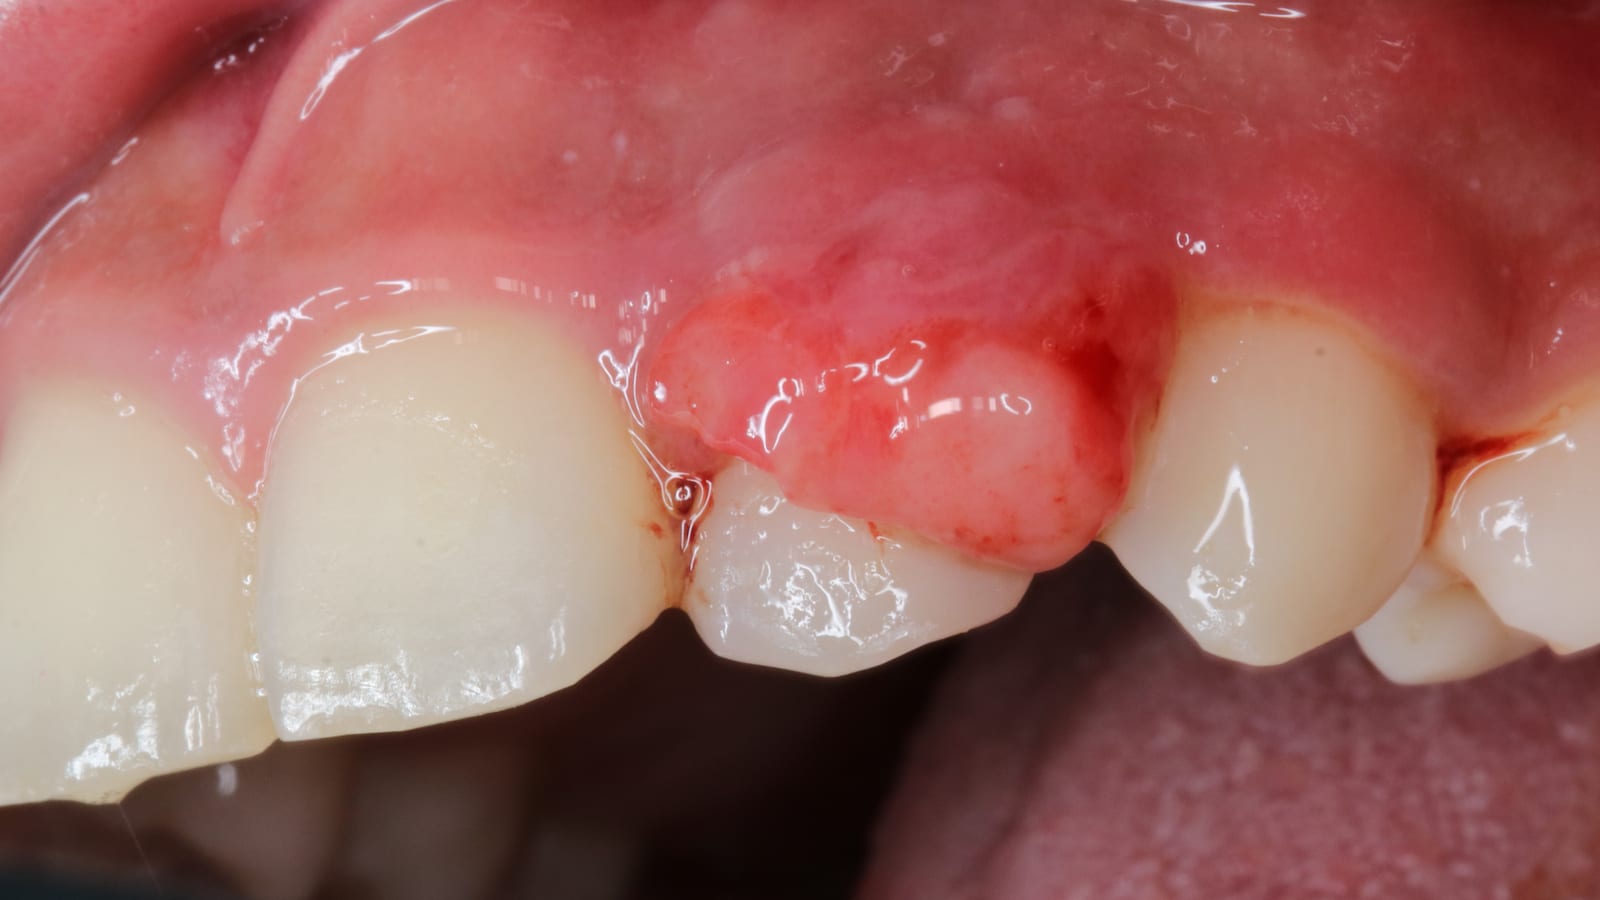 Abnormal growth of the gums over a tooth